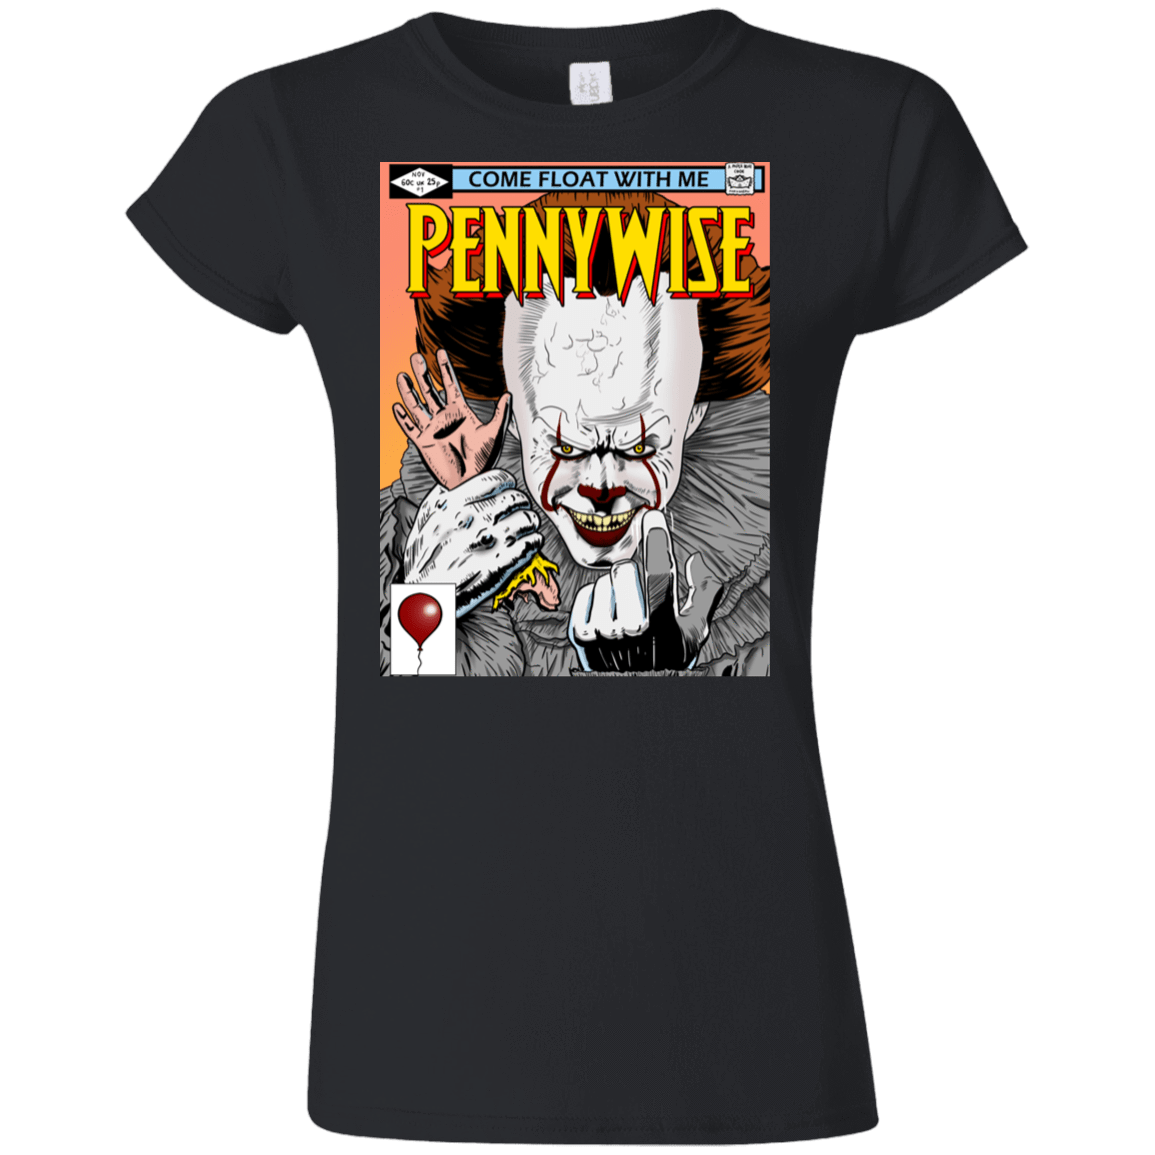 T-Shirts Black / S Pennywise 8+ Junior Slimmer-Fit T-Shirt